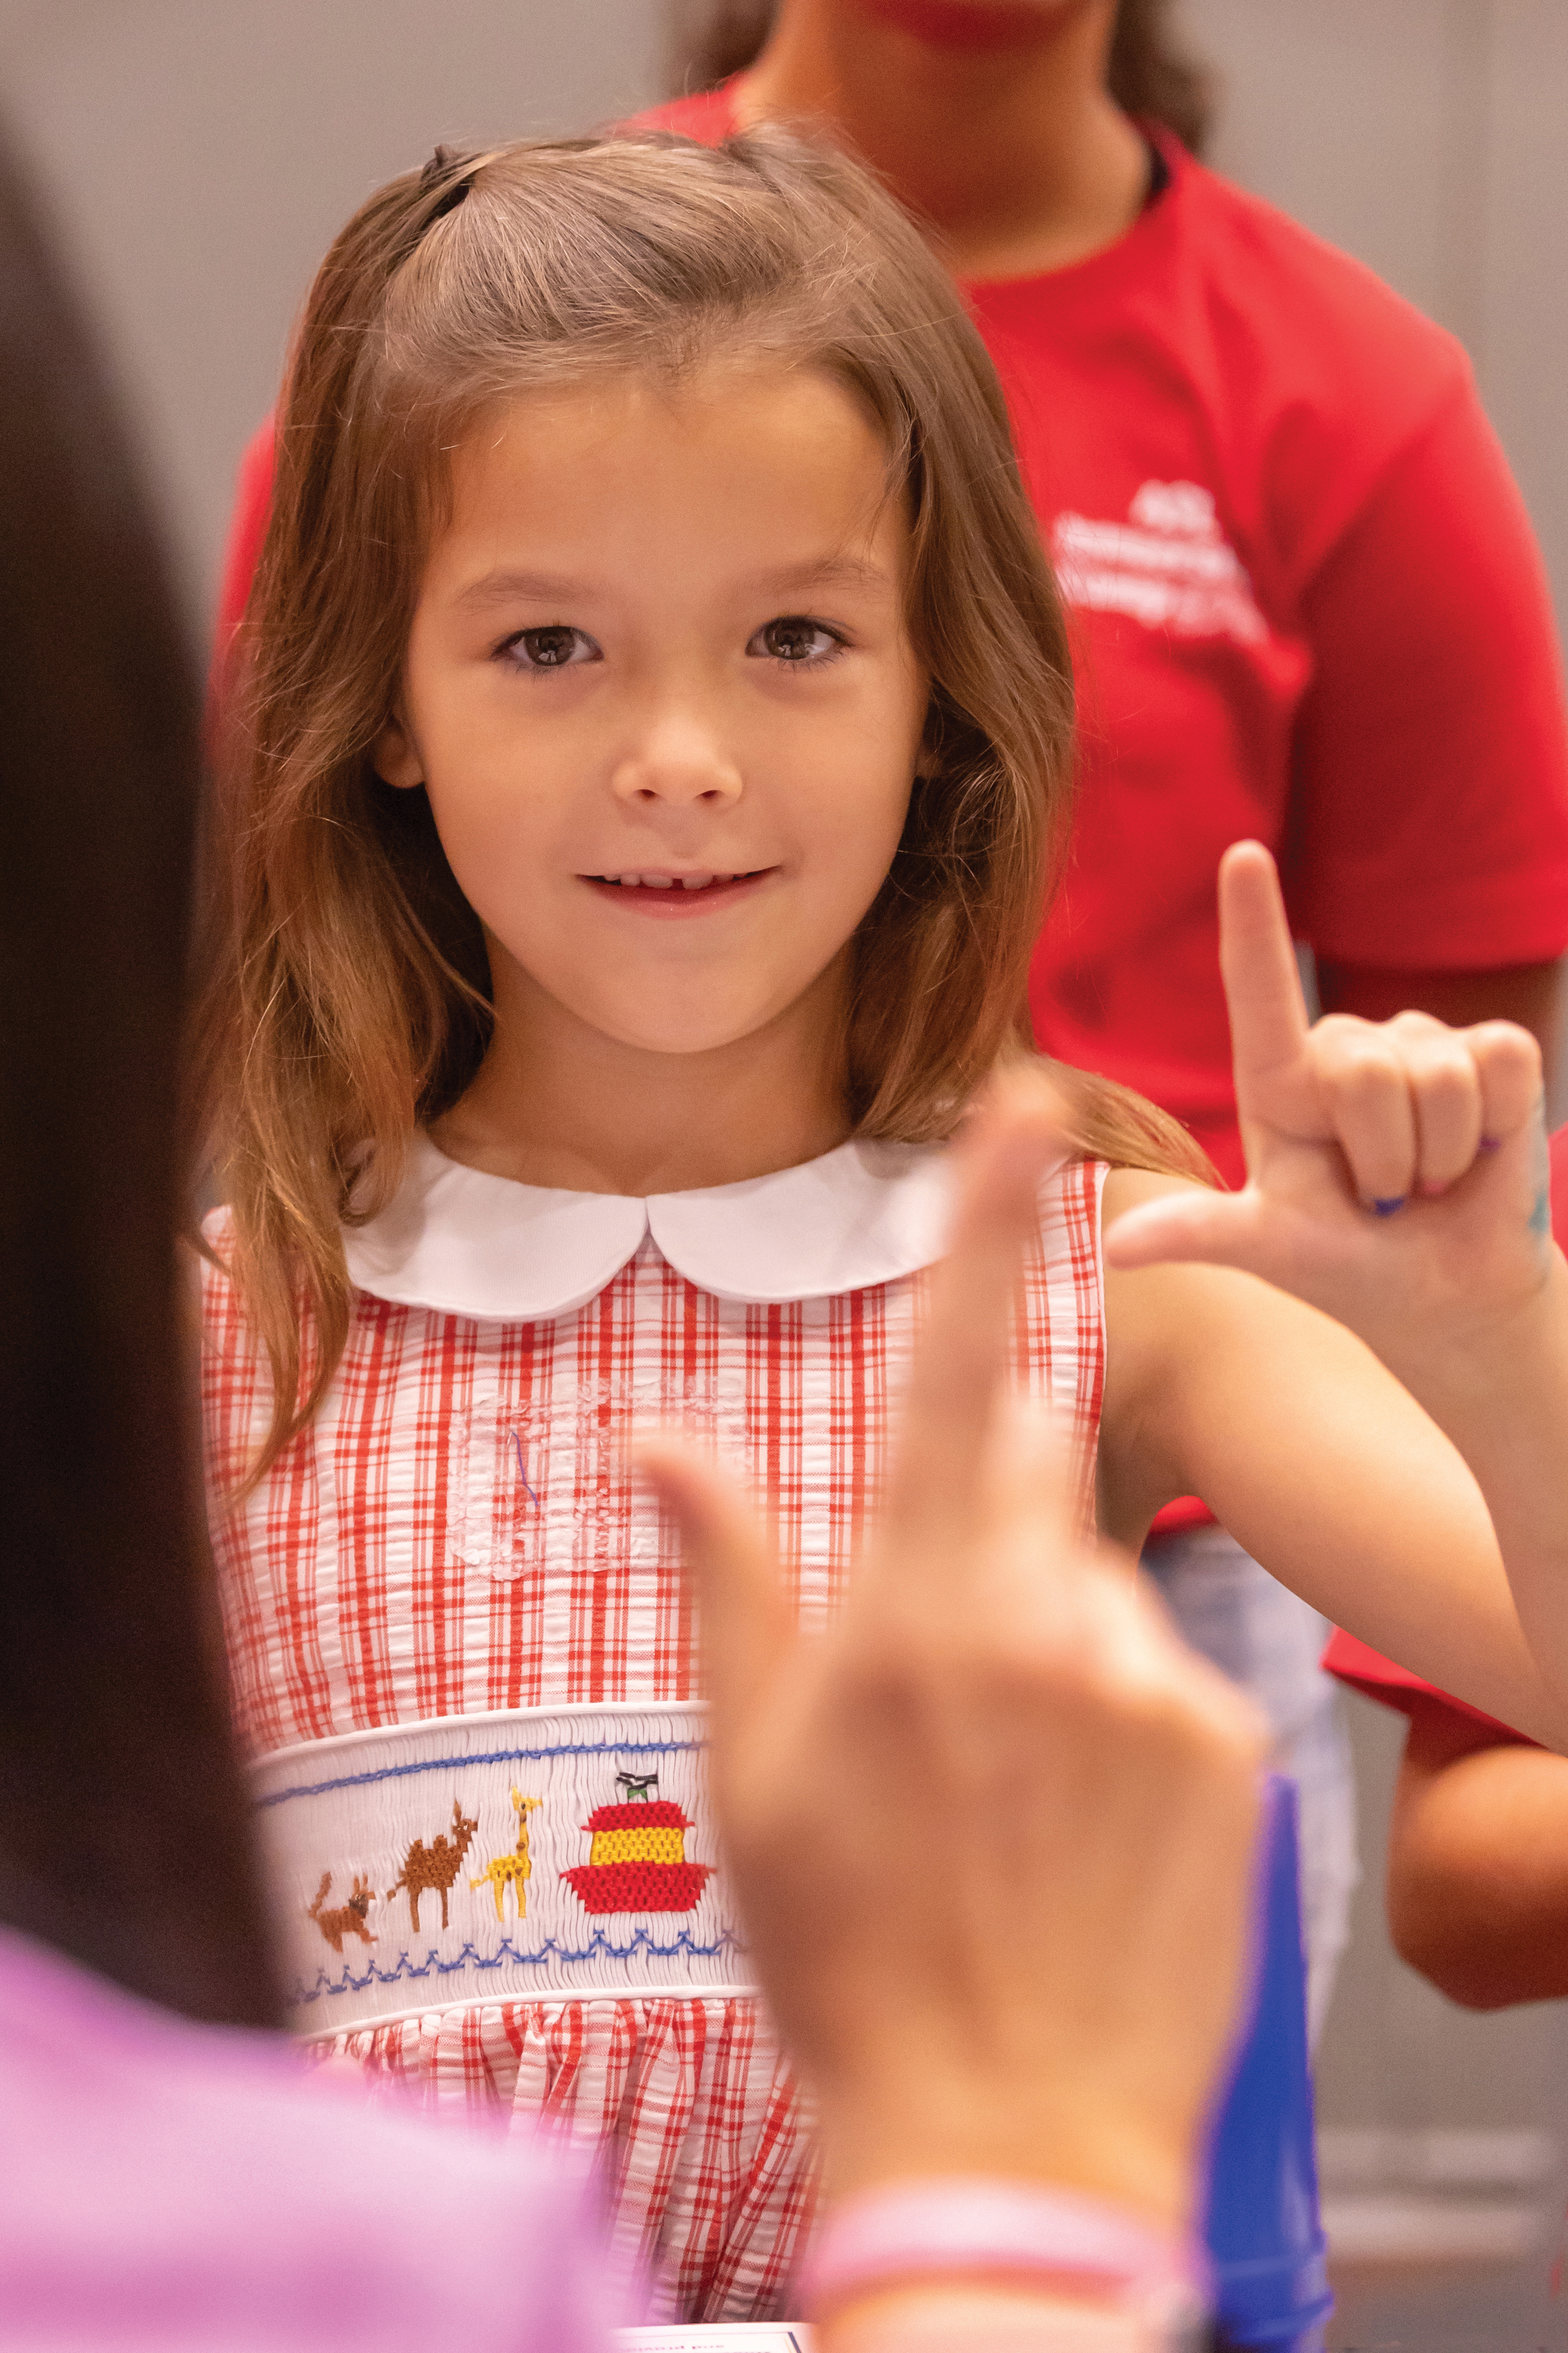 Young girl with brown hair makes an "L" with her hand during an ASL summer camp.